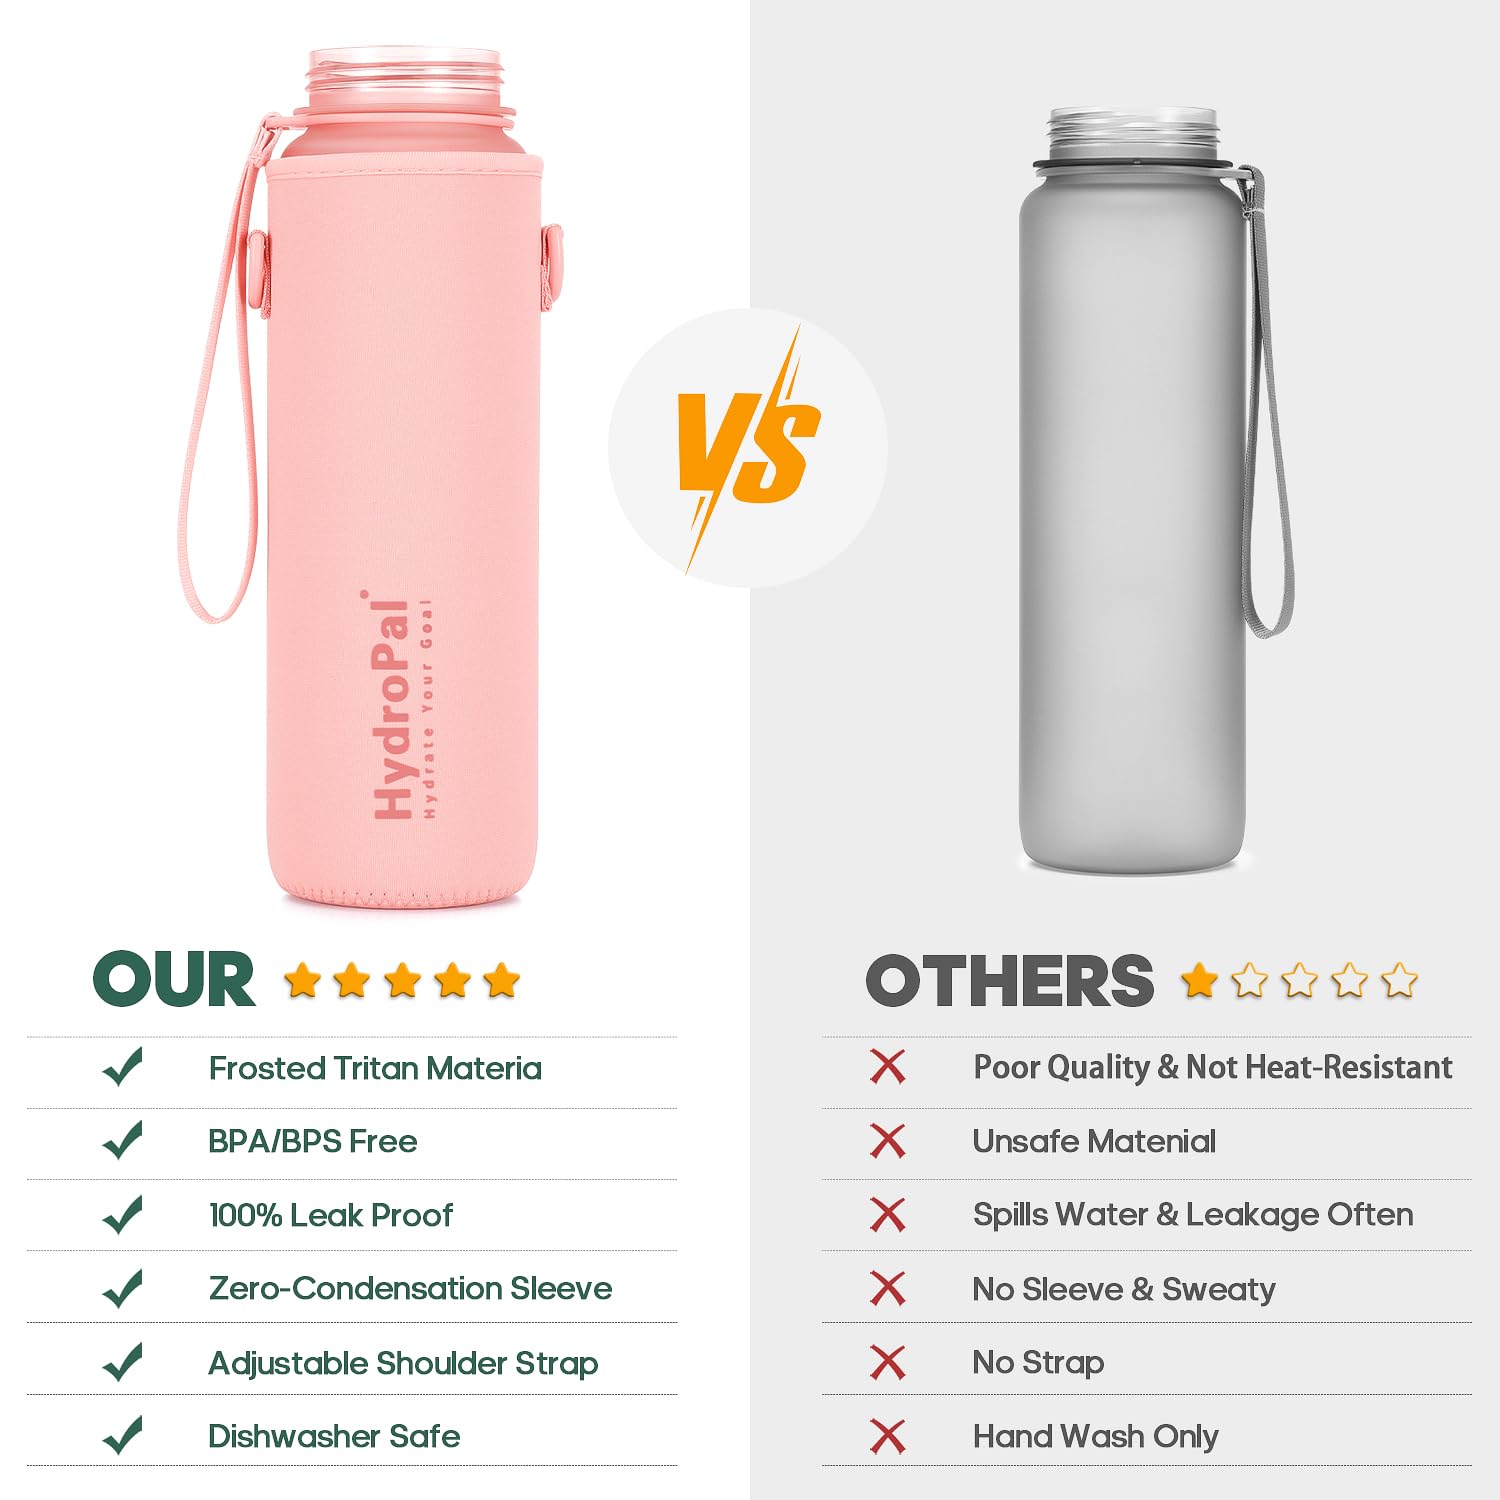 34 oz Water Bottles with No Sweat Sleeve, Tritan Water Bottle with Times to Drink, BPA Free Leak Proof with Fruit Infuser Strainer & Time Marker for Gym Fitness Outdoor Camping, 1L Large Sports Bottle